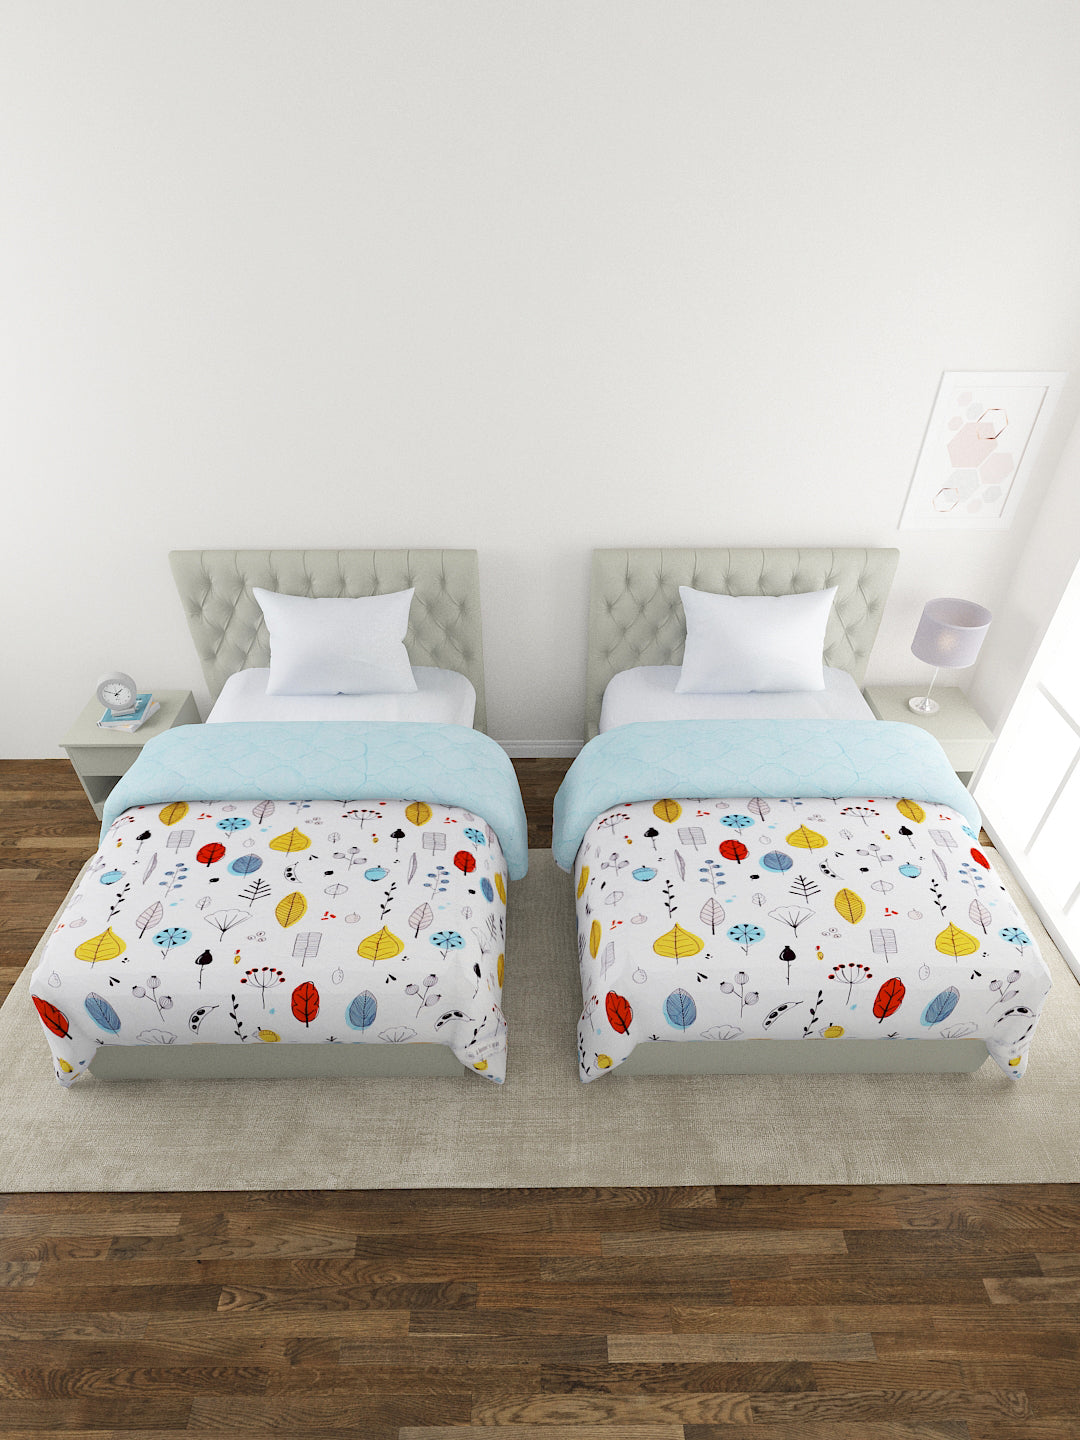 Floral Print Set of 2 Single Bed Light Weight Comforter- Multicolor